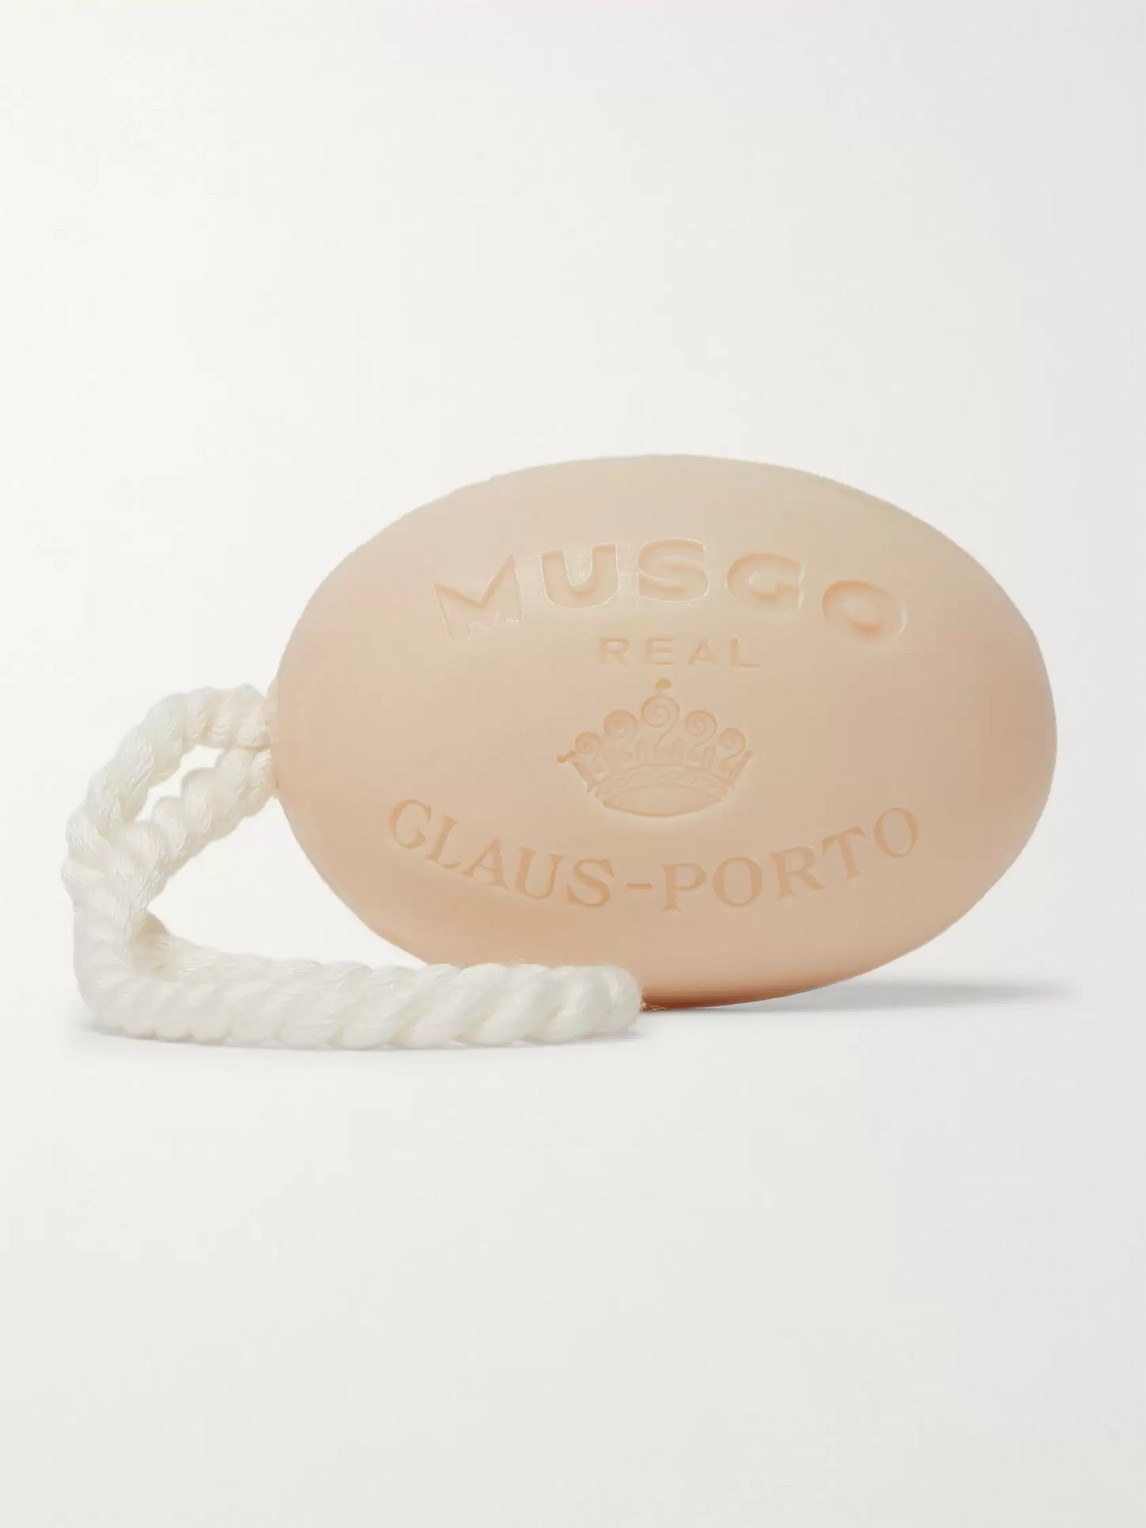 Claus Porto Orange Amber Soap On A Rope, 190g In Colorless